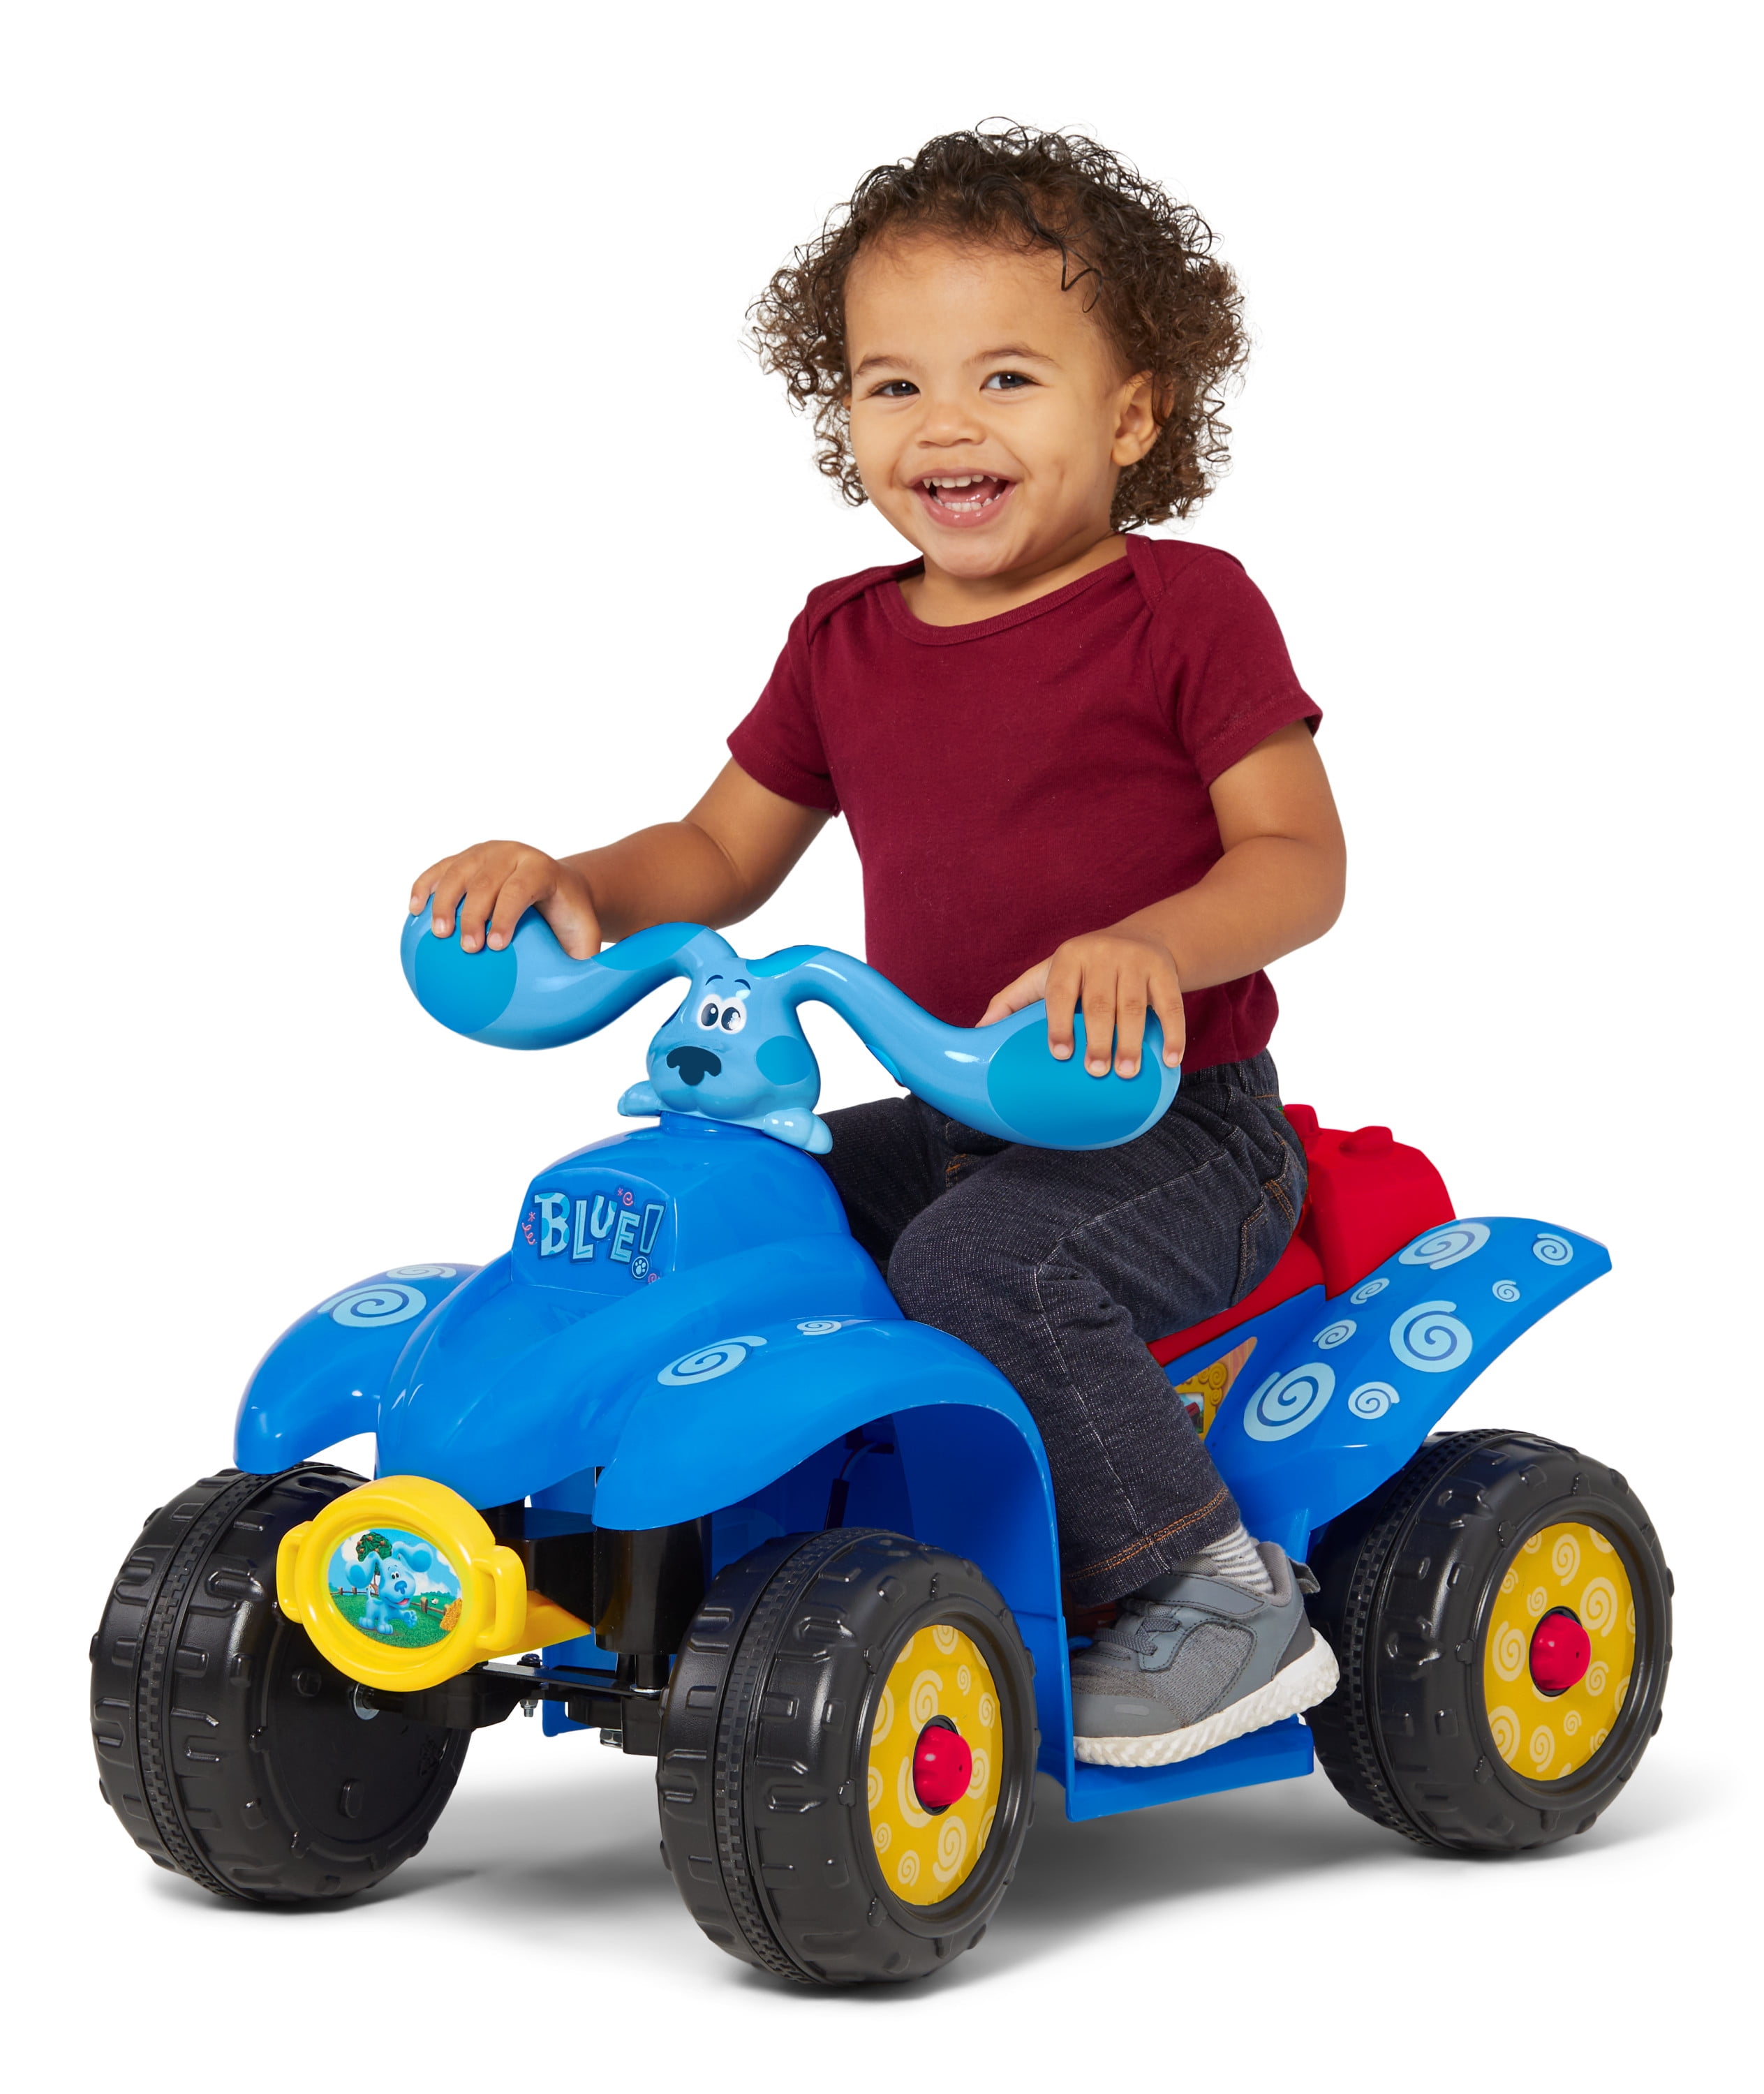 Details about   Nickelodeon Blue's Clues Toddler Ride-On Toy By Kid Trax Brand New Kid Toy Gift 